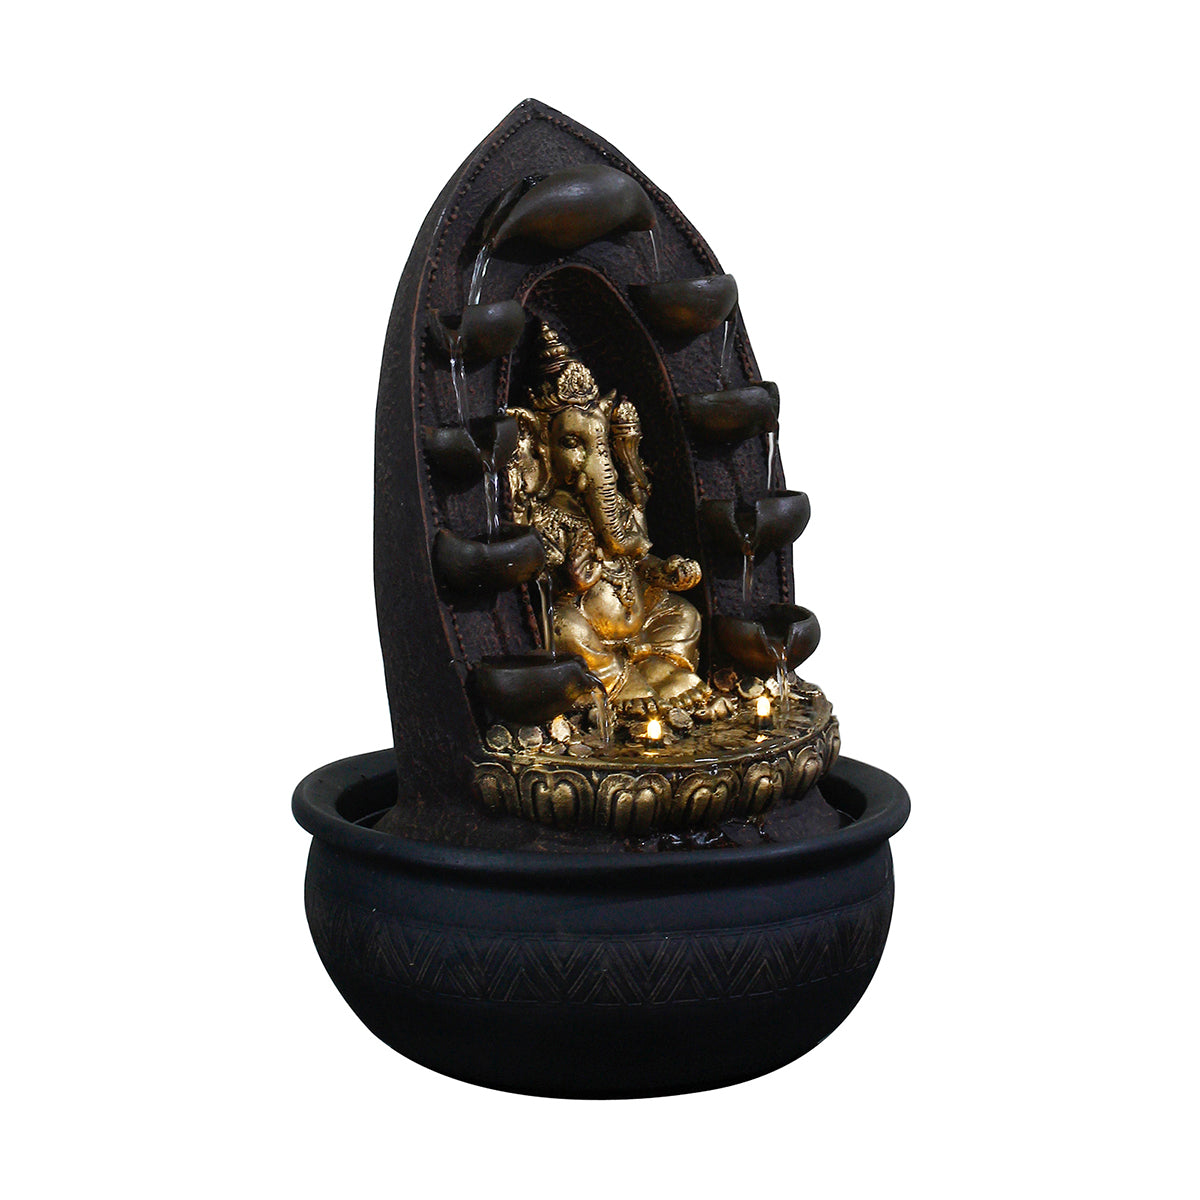 Polystone Black and Golden Decorative Lord Ganesha Statue Water Fountain With Light For Home/Office Décor 3